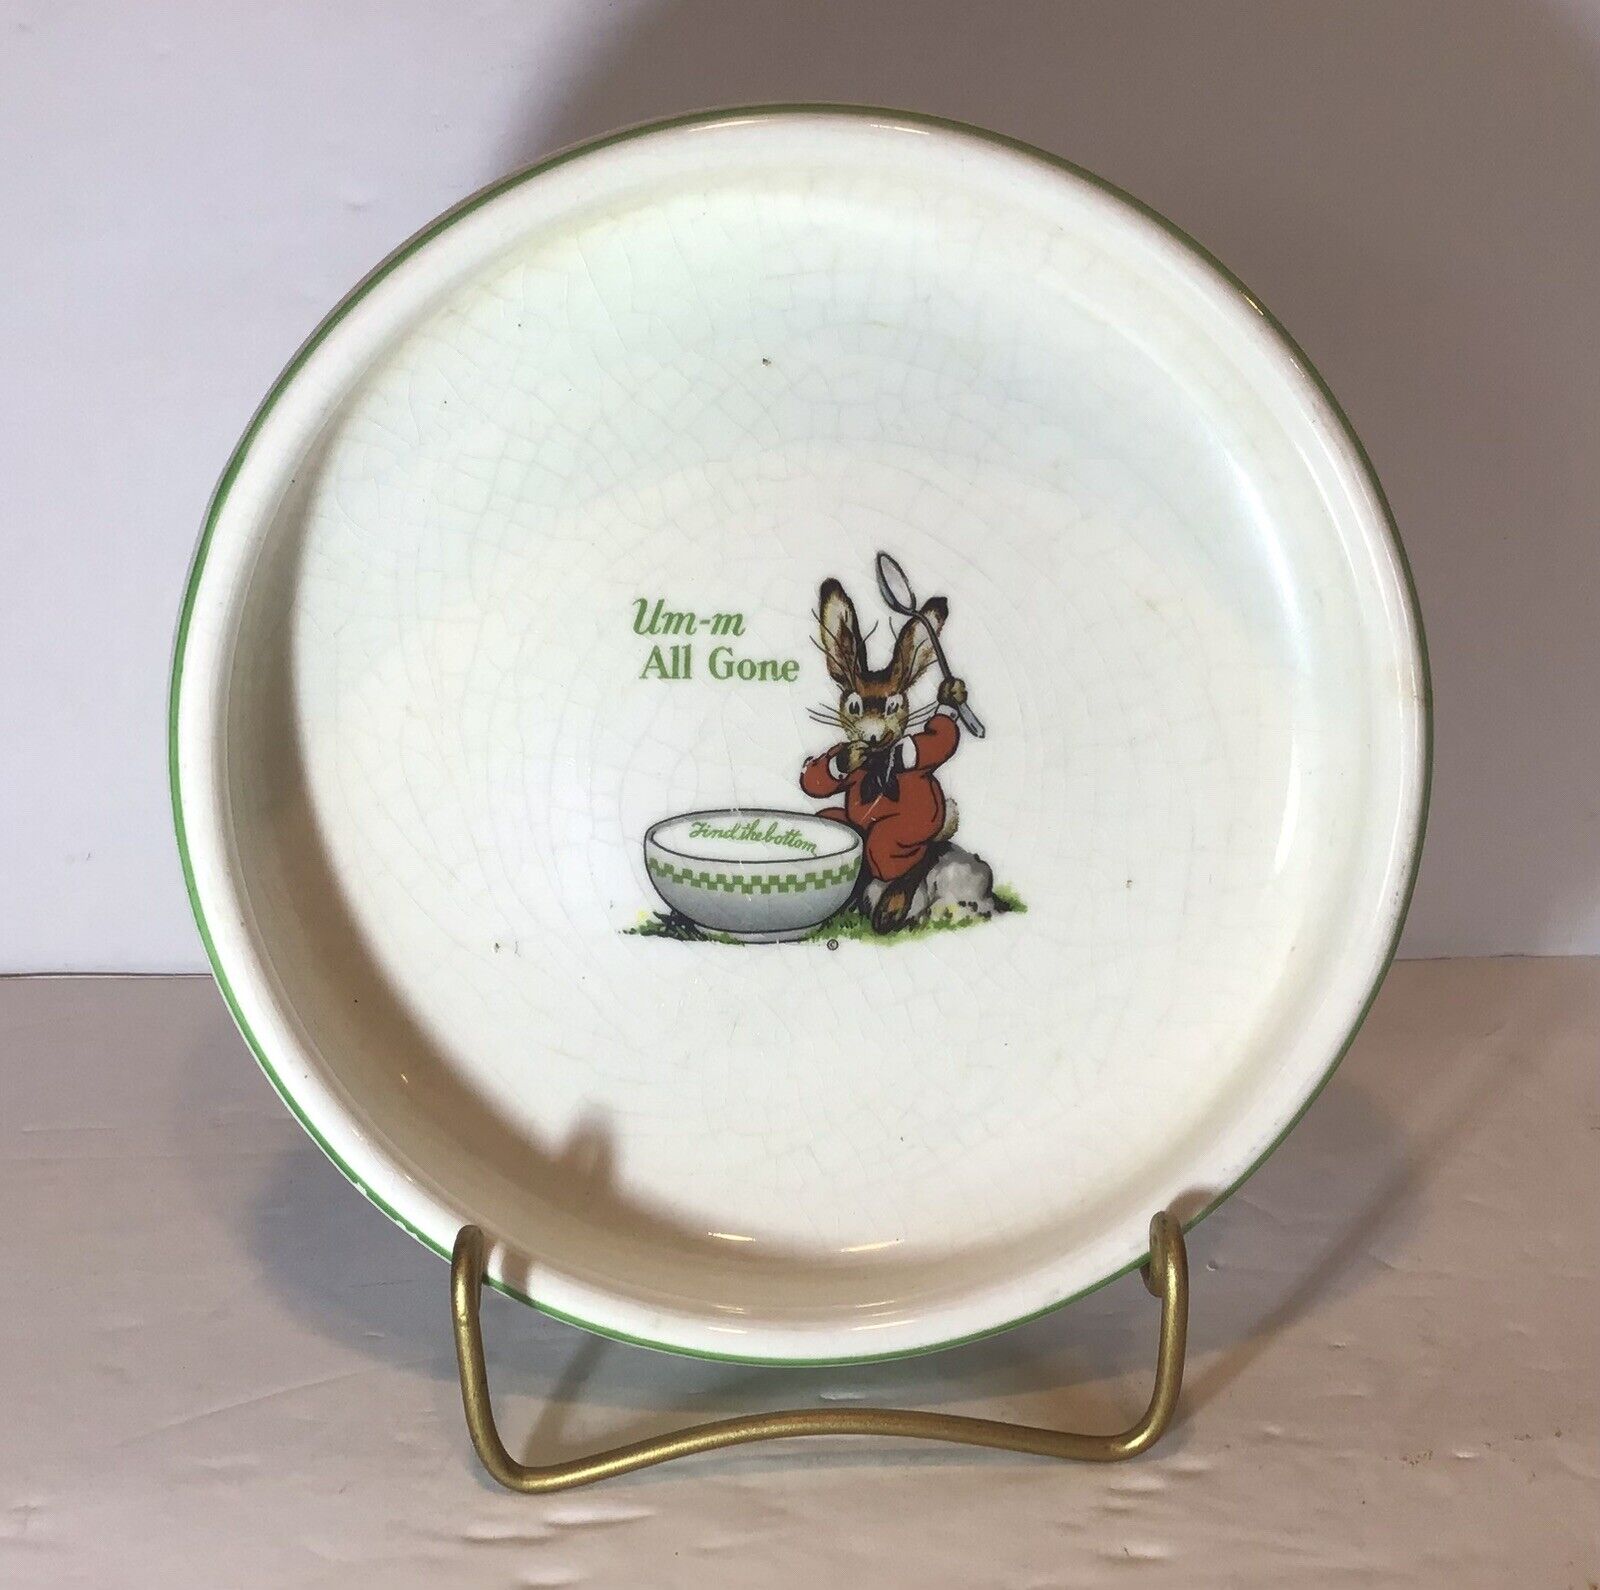 Vintage Ralston Purina 1925 St. Louis Child’s Dish “Find The Bottom” Bunny 6.5”